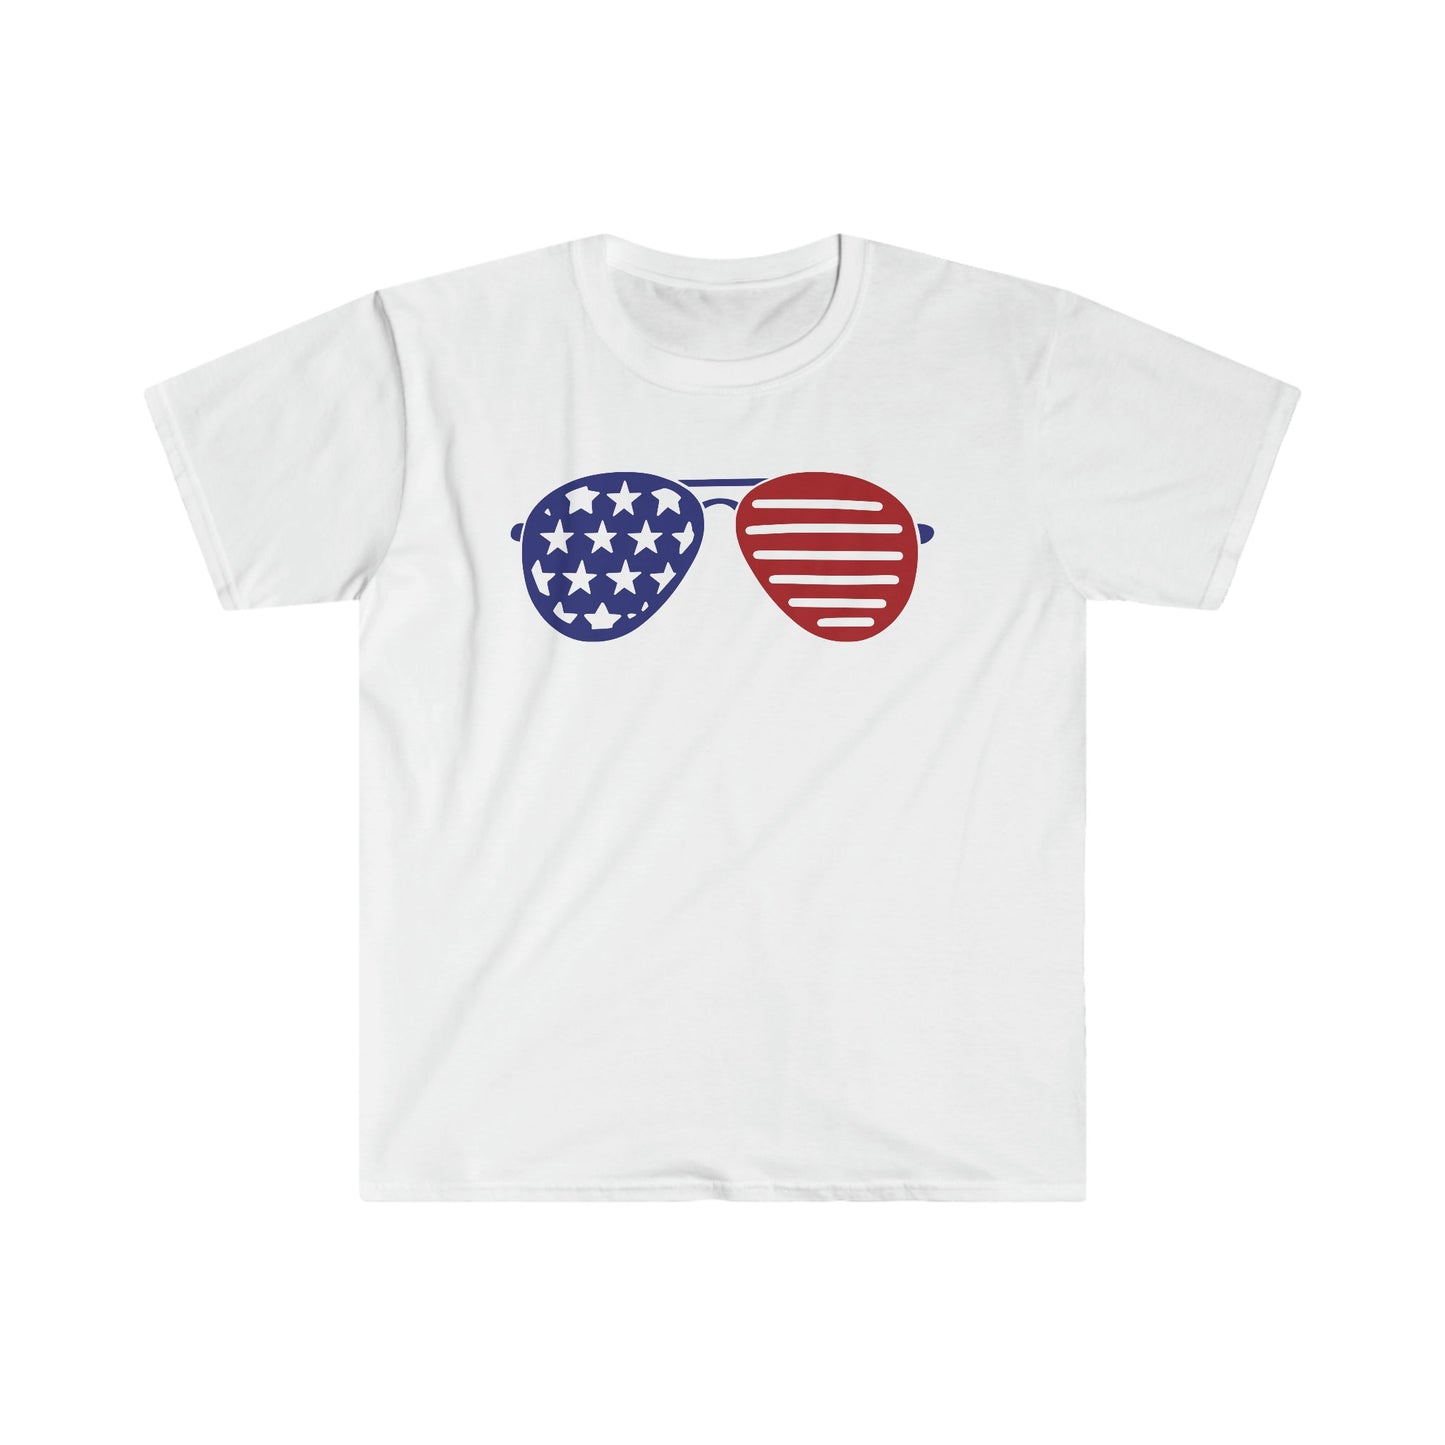 Sunglasses - American Flag - 4th of July - Independence Day - Unisex Softstyle T-Shirt